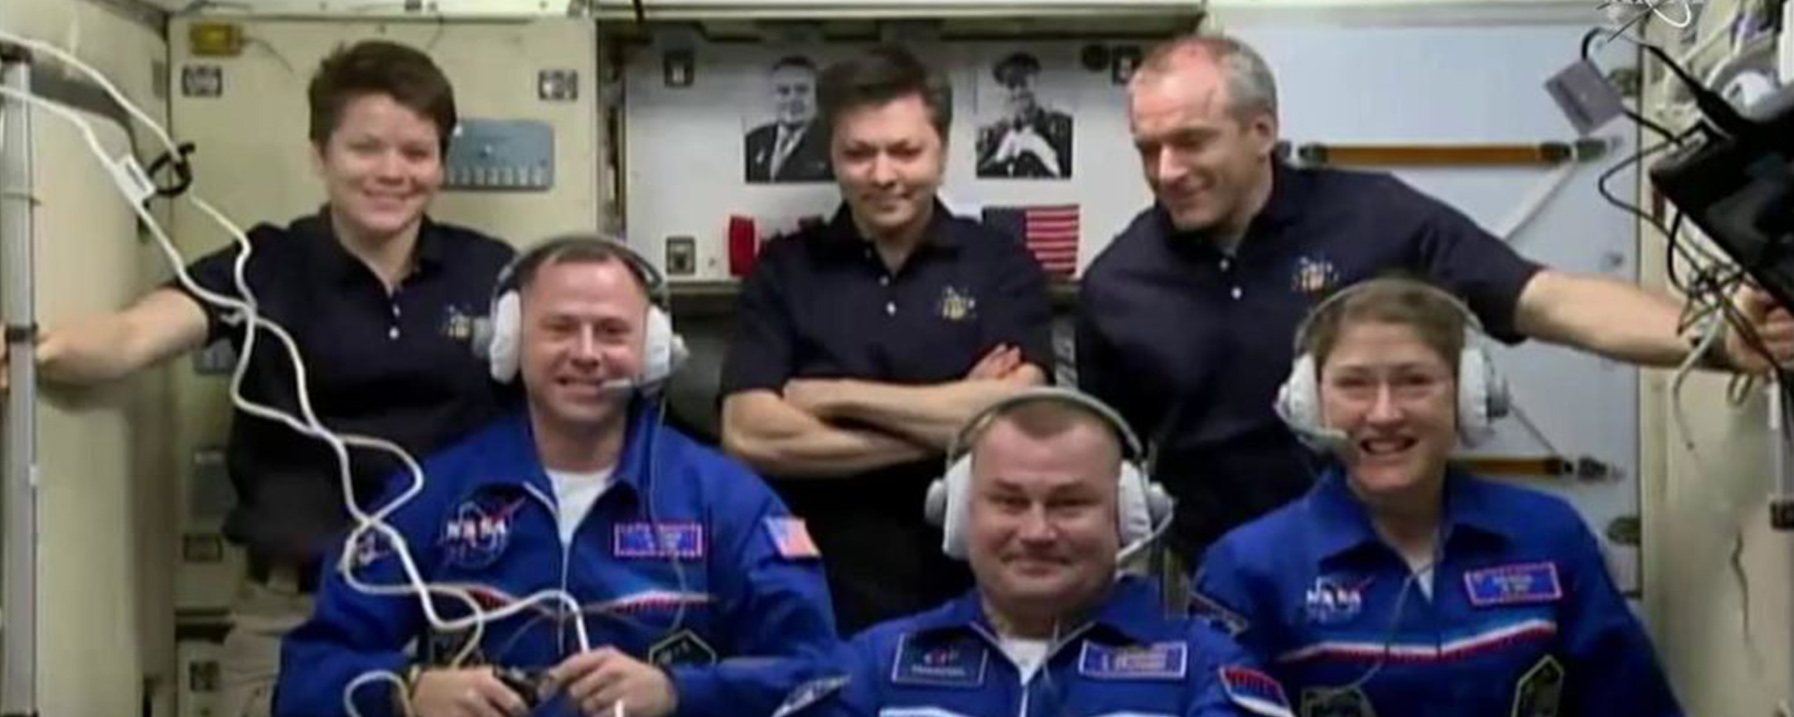 6 people on International Space Station